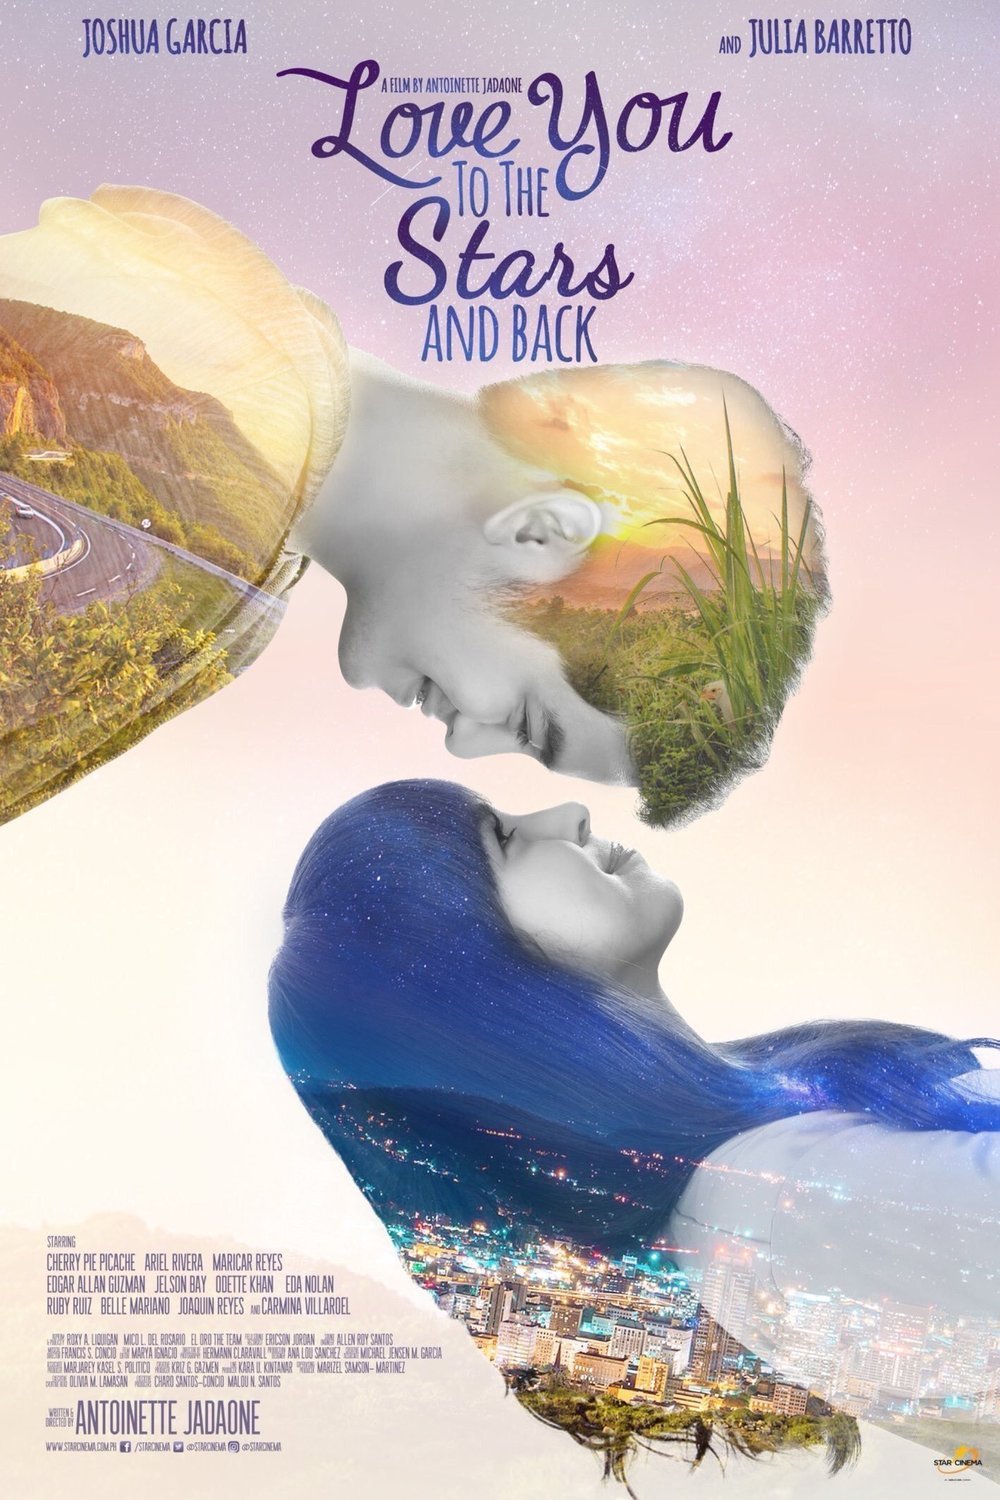 Poster of the movie Love You to the Stars and Back